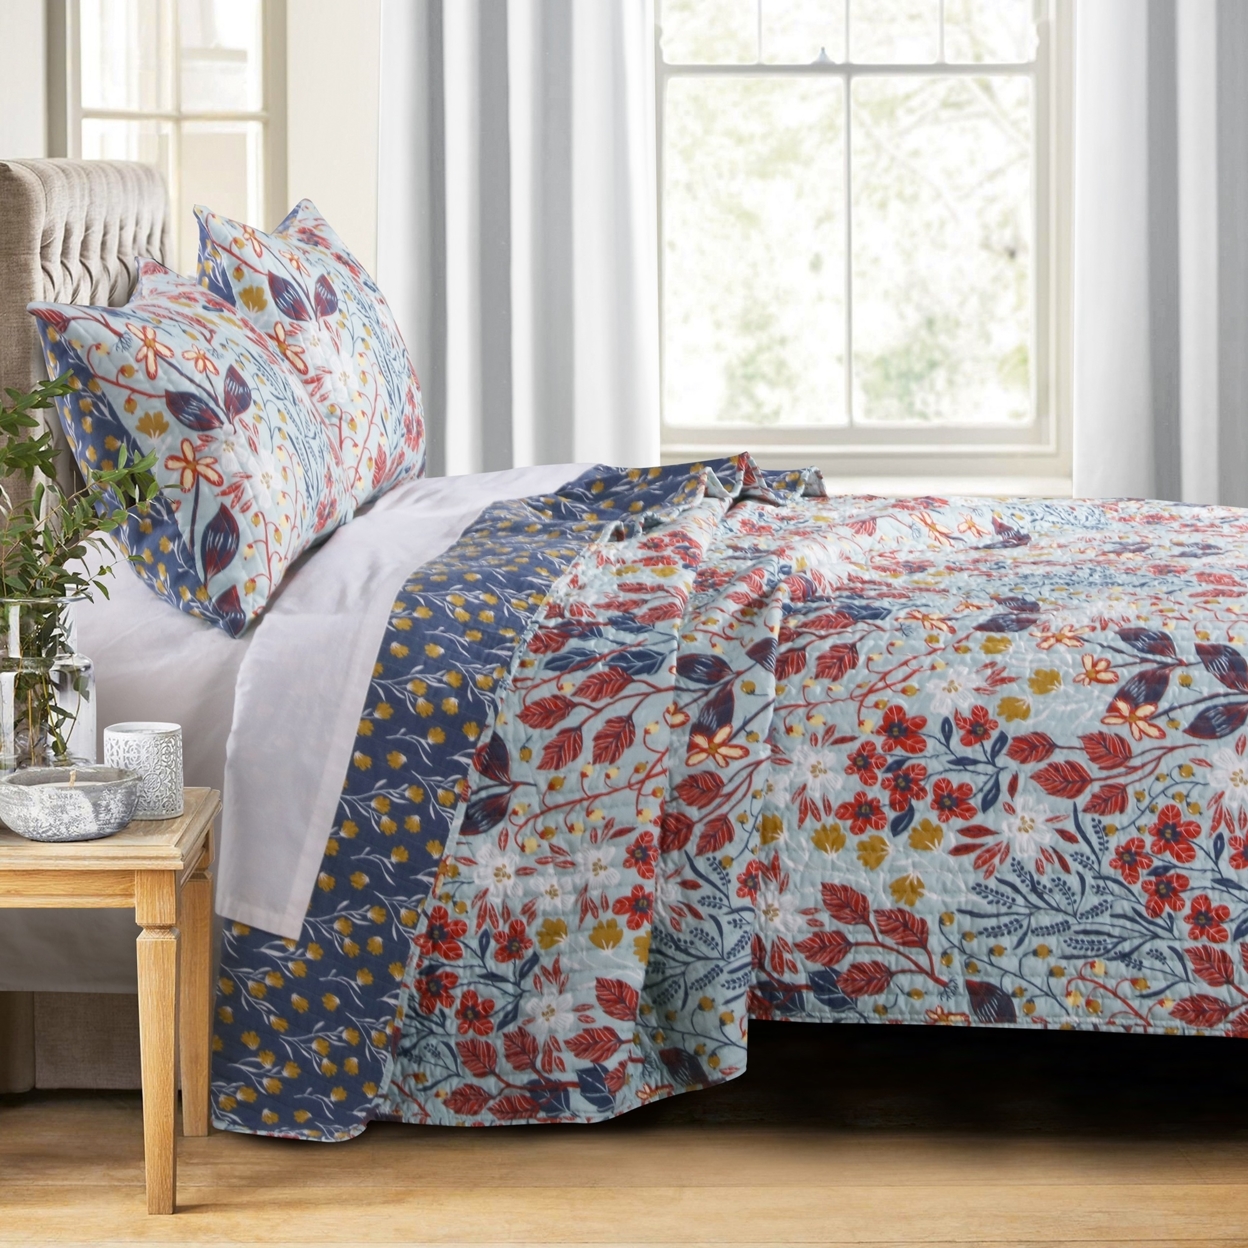 King Size 3 Piece Polyester Quilt Set With Floral Prints, Multicolor- Saltoro Sherpi